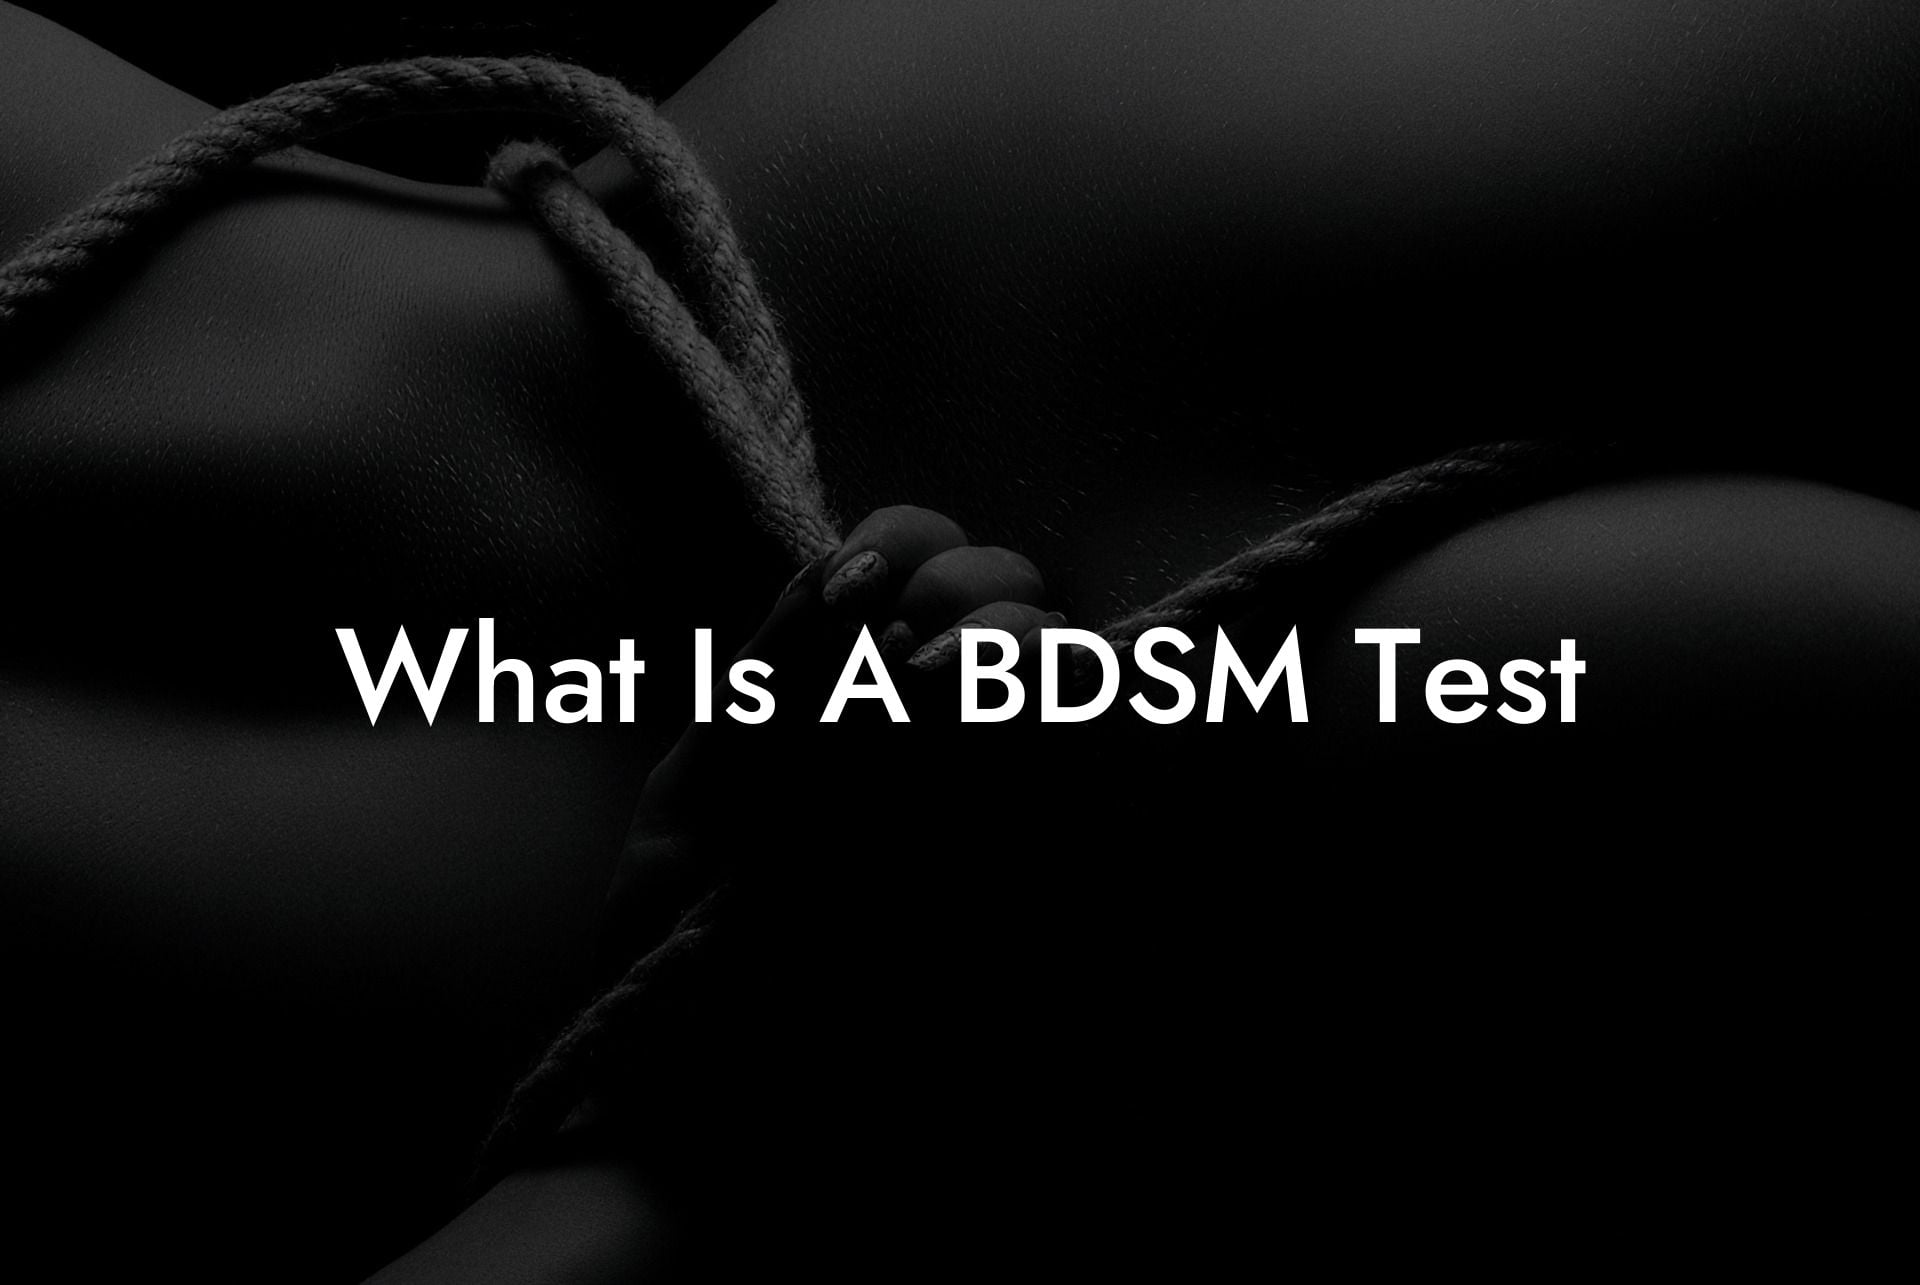 What Is A BDSM Test